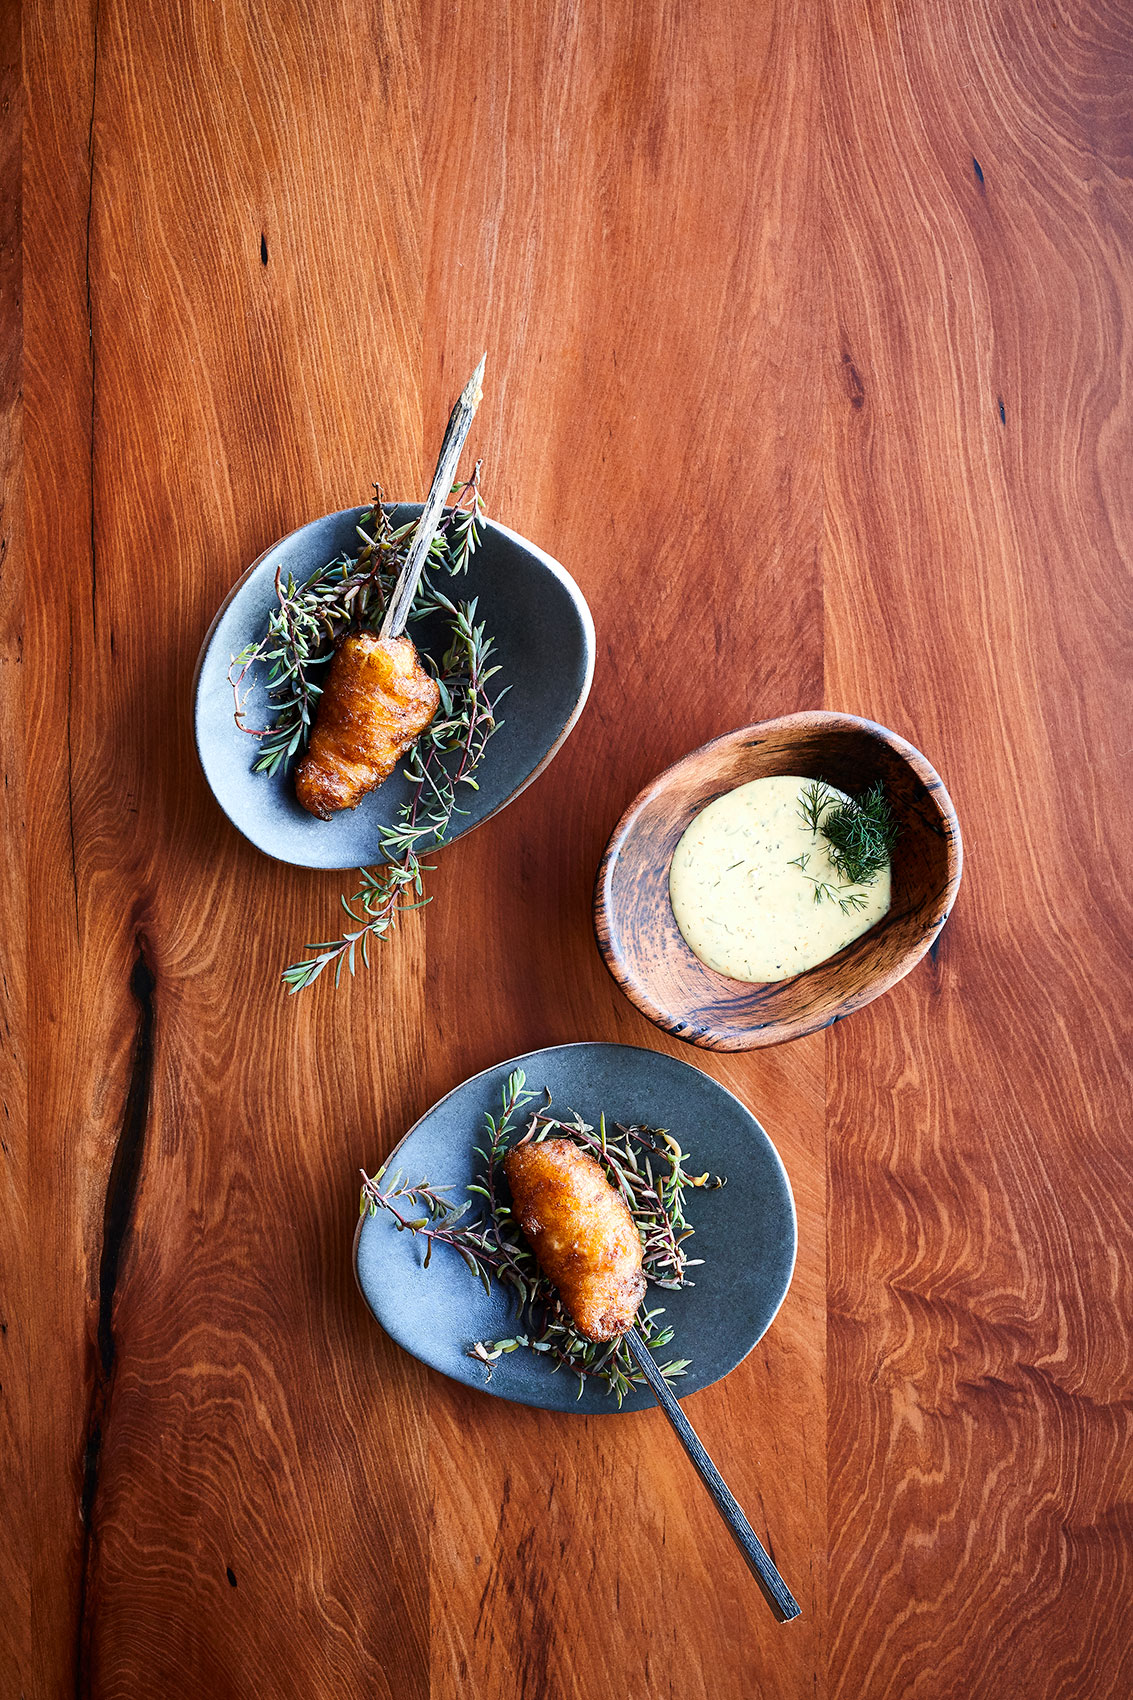 Ahi Scampi Corndogs on Natural Wooden Skewers • Hospitality & Culinary Food Photography